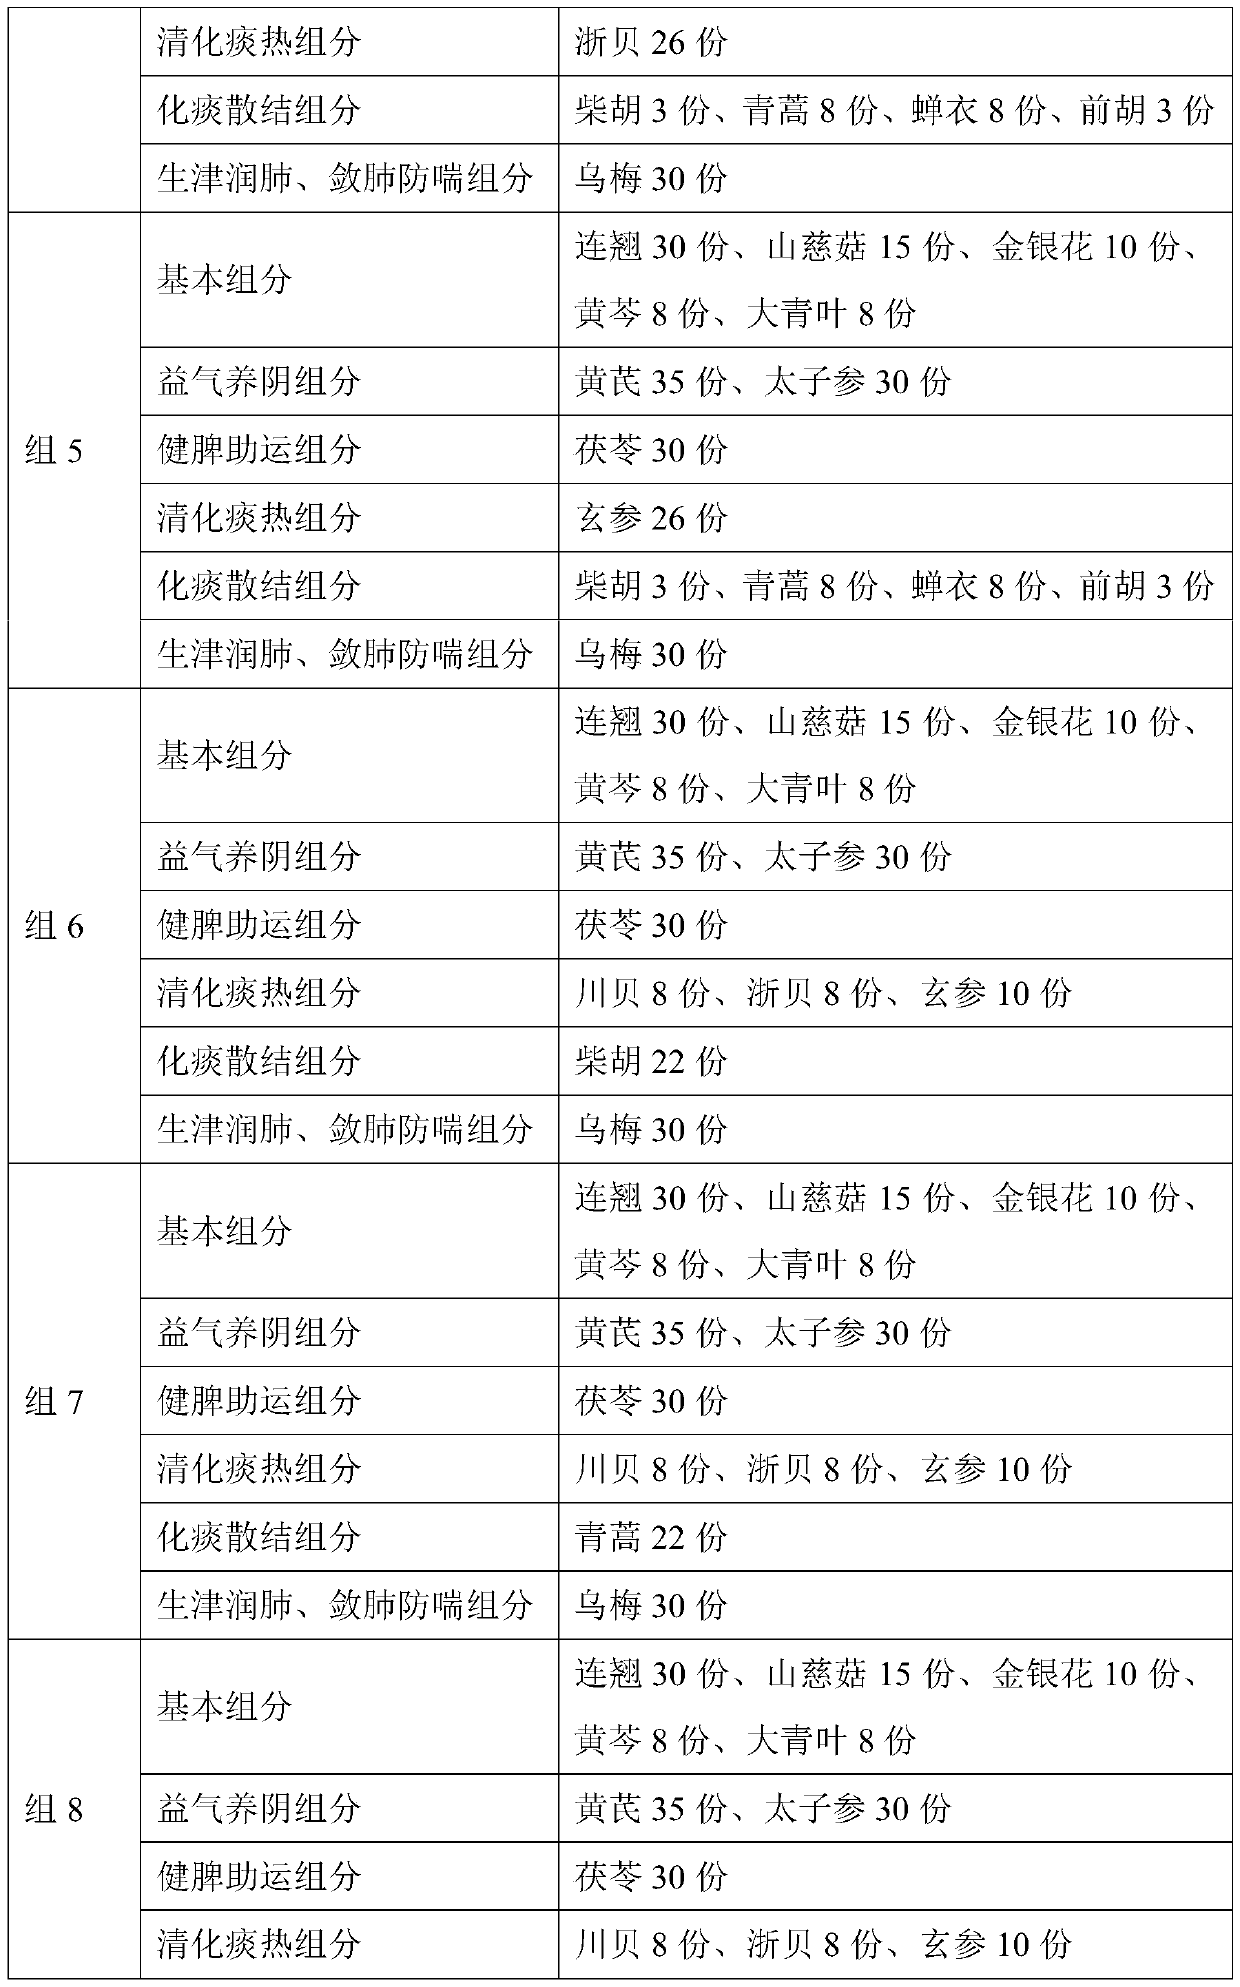 Traditional Chinese medicine composition and application thereof in prevention and treatment of viral pneumonia